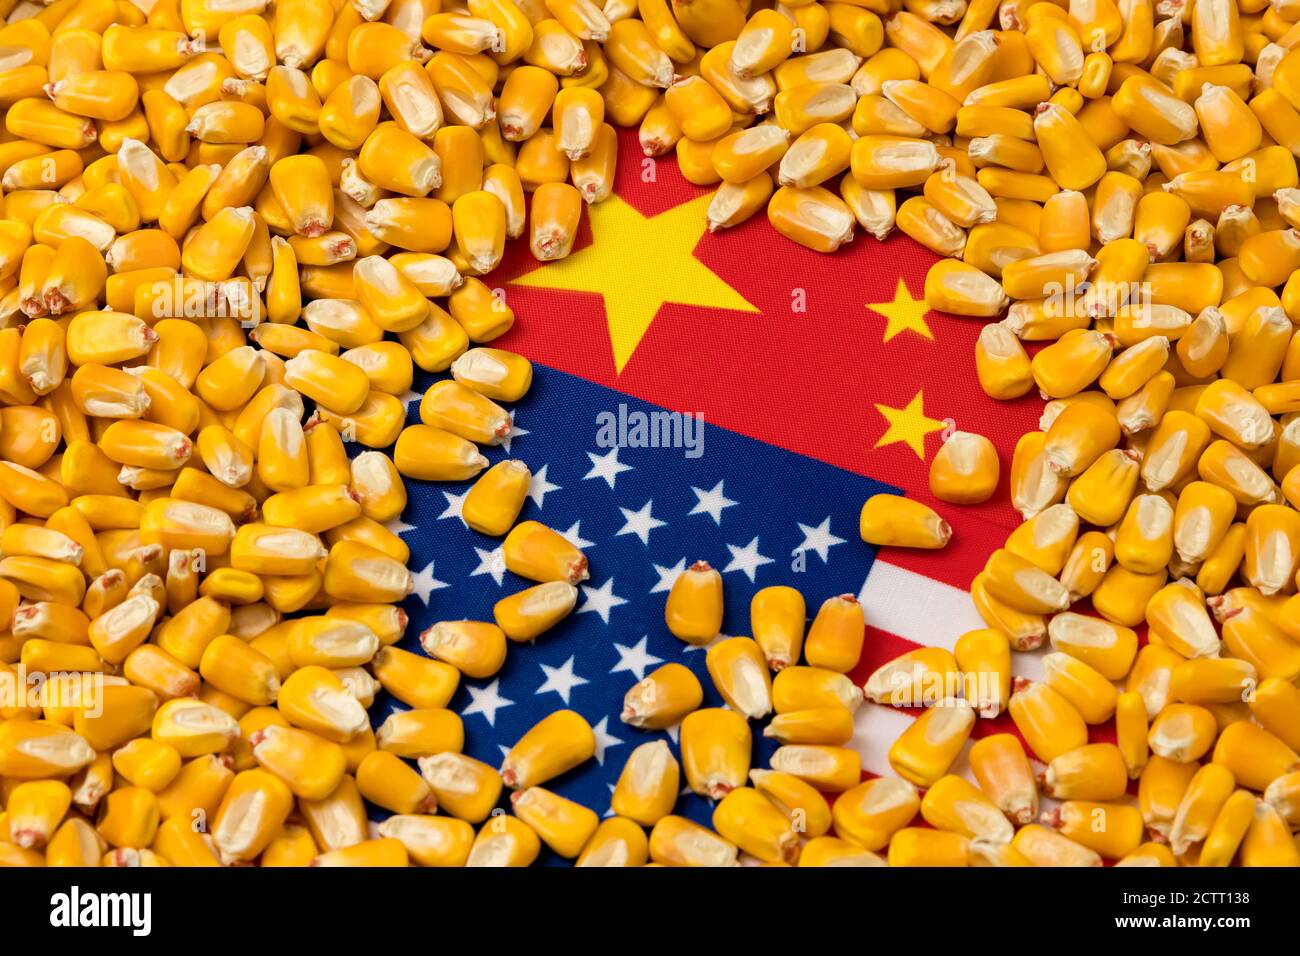 Flags of China and United States of America covered in corn kernels. Concept of Chinese and American agriculture imports, exports, trade war agreement Stock Photo